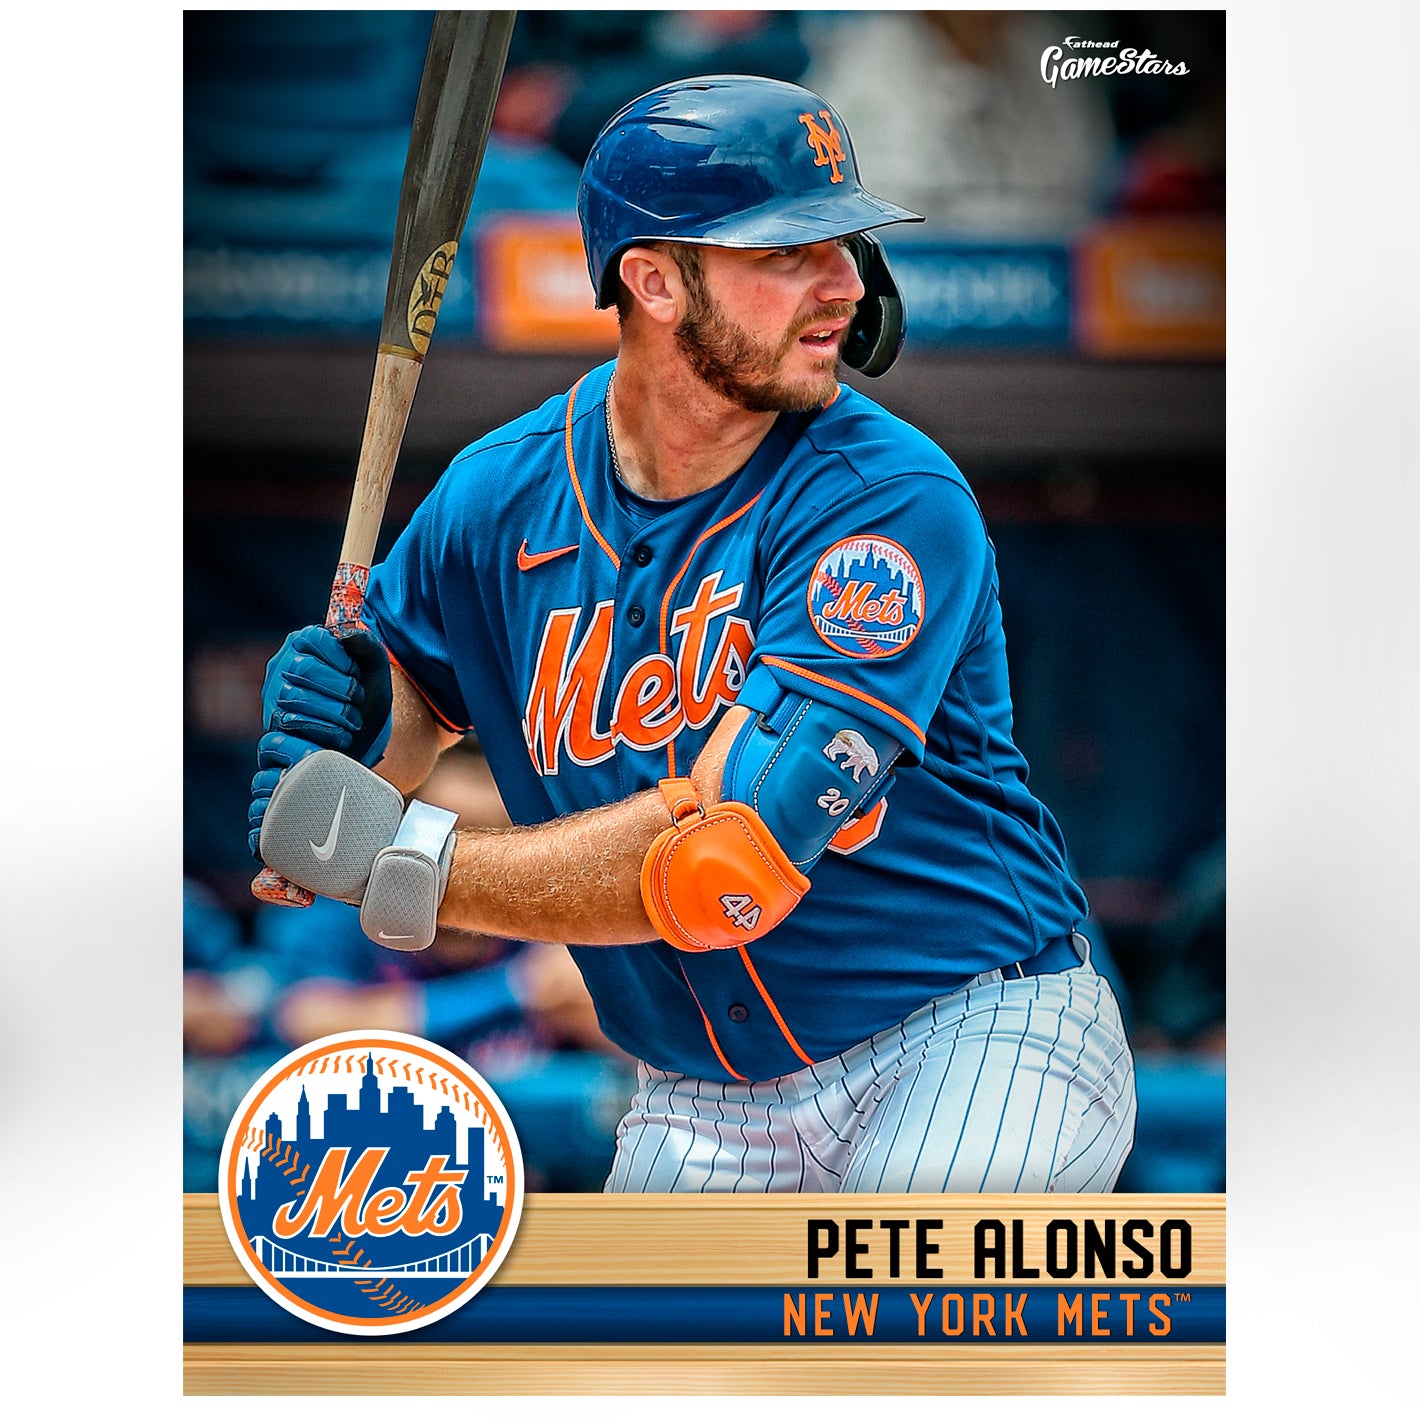 New York Mets: Pete Alonso 2021 GameStar - MLB Removable Wall Adhesive Wall Decal Large